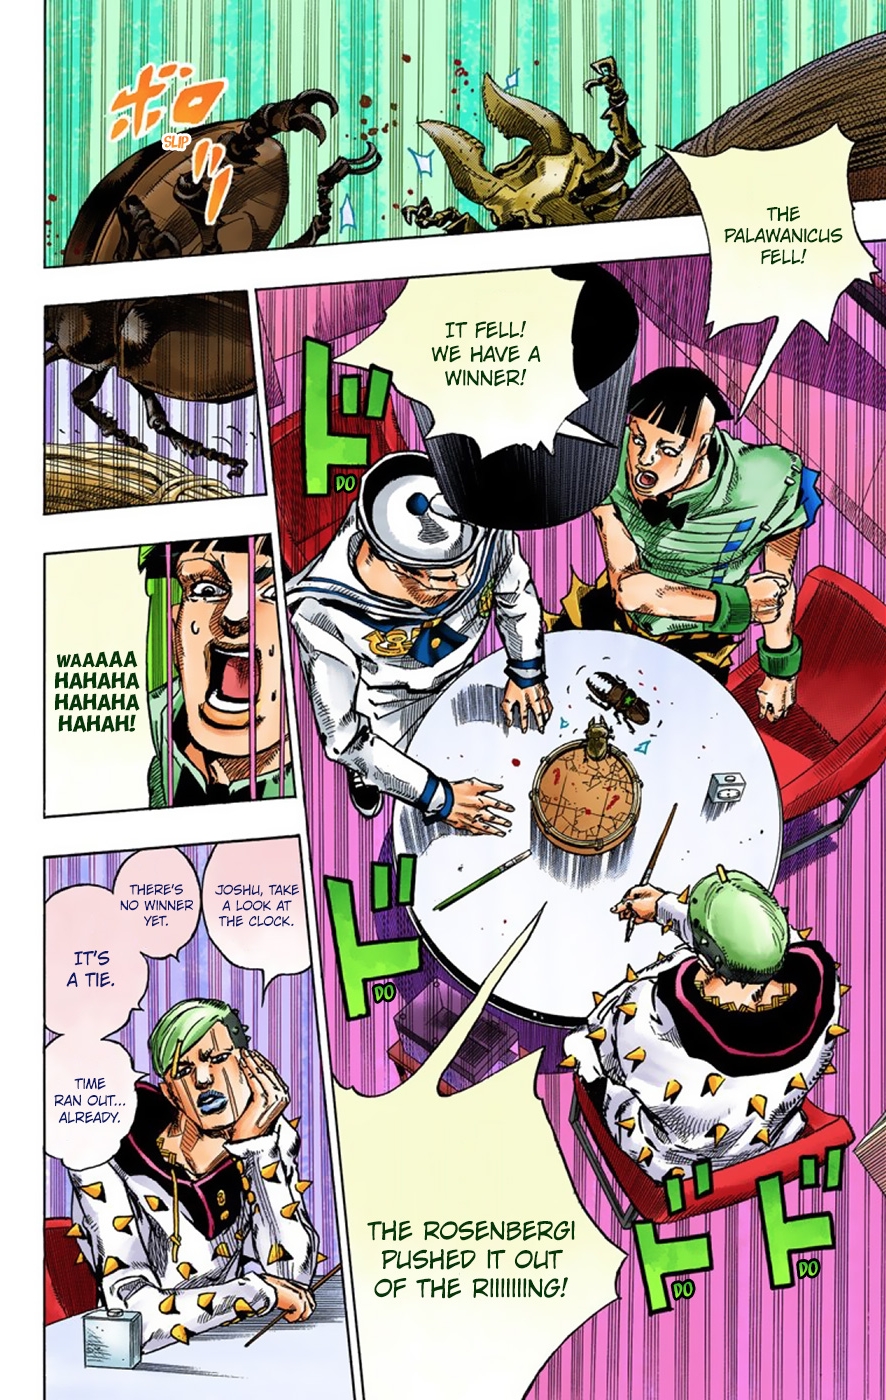 JoJo's Bizarre Adventure Part 8 JoJolion [Official Colored] Vol. 9 Ch. 37 Every Day is a Summer Vacation Part 4